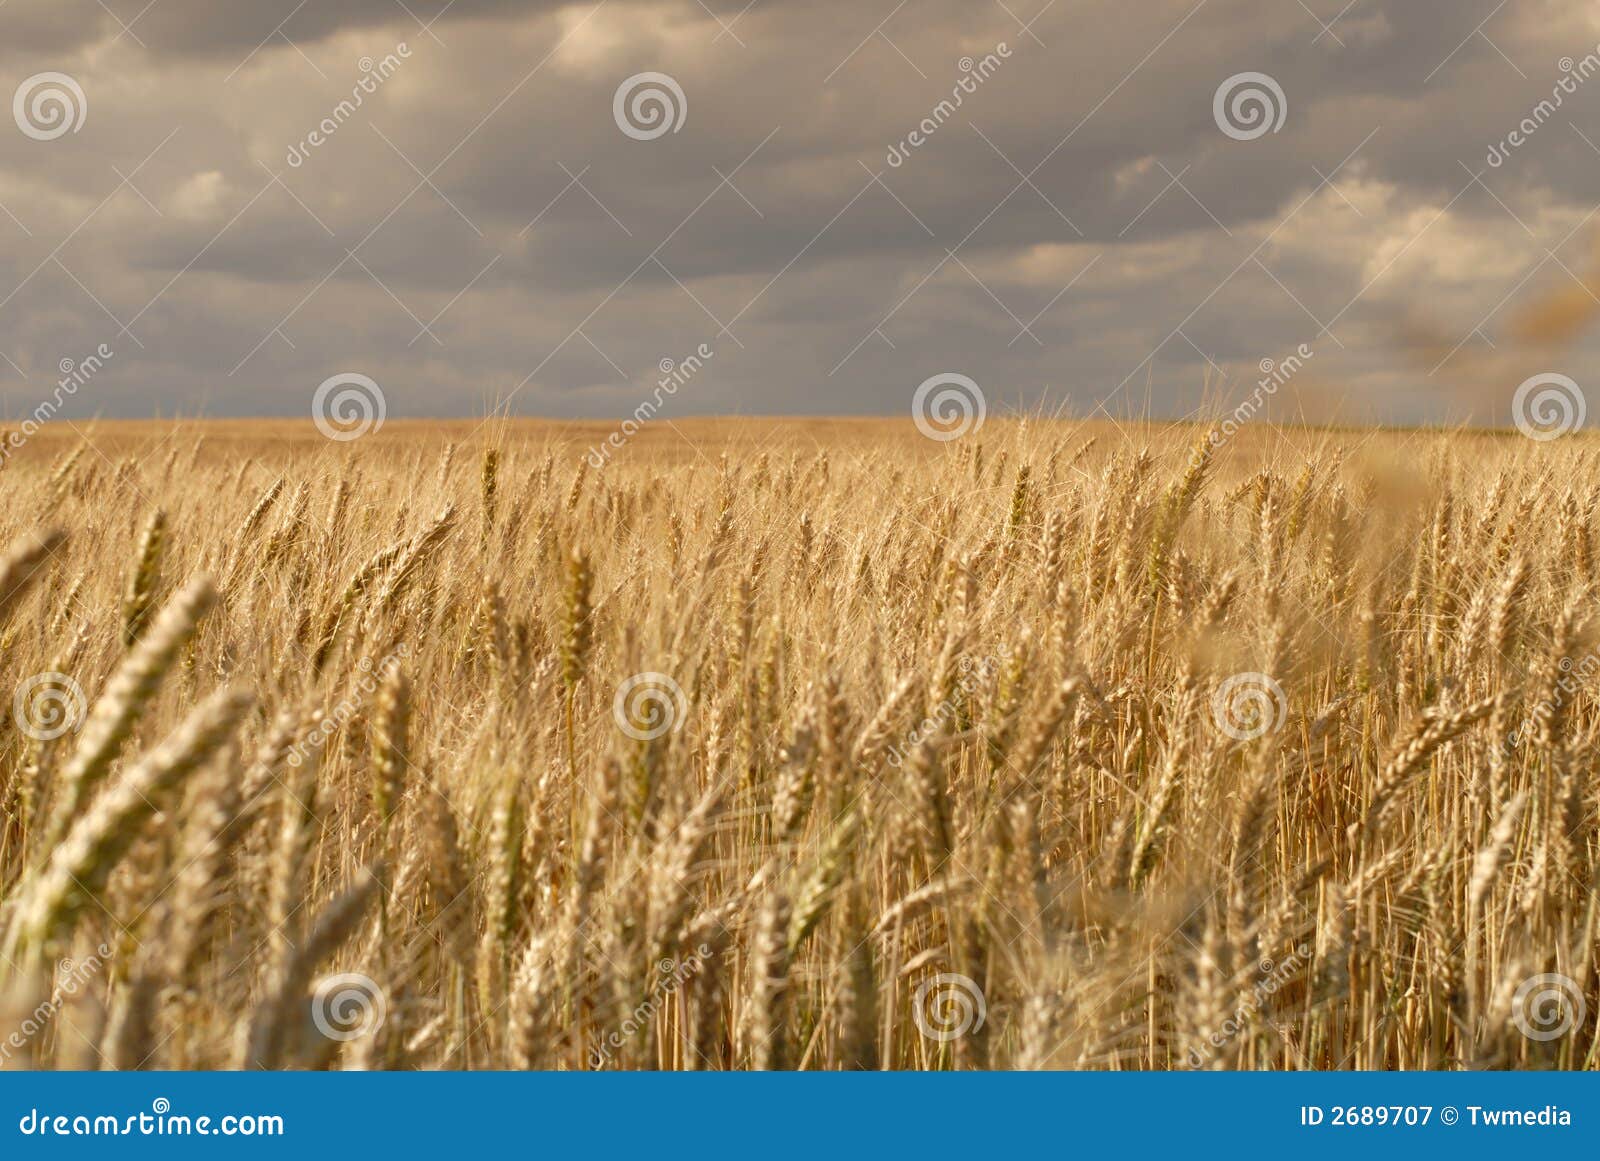 wheat fields with clouds